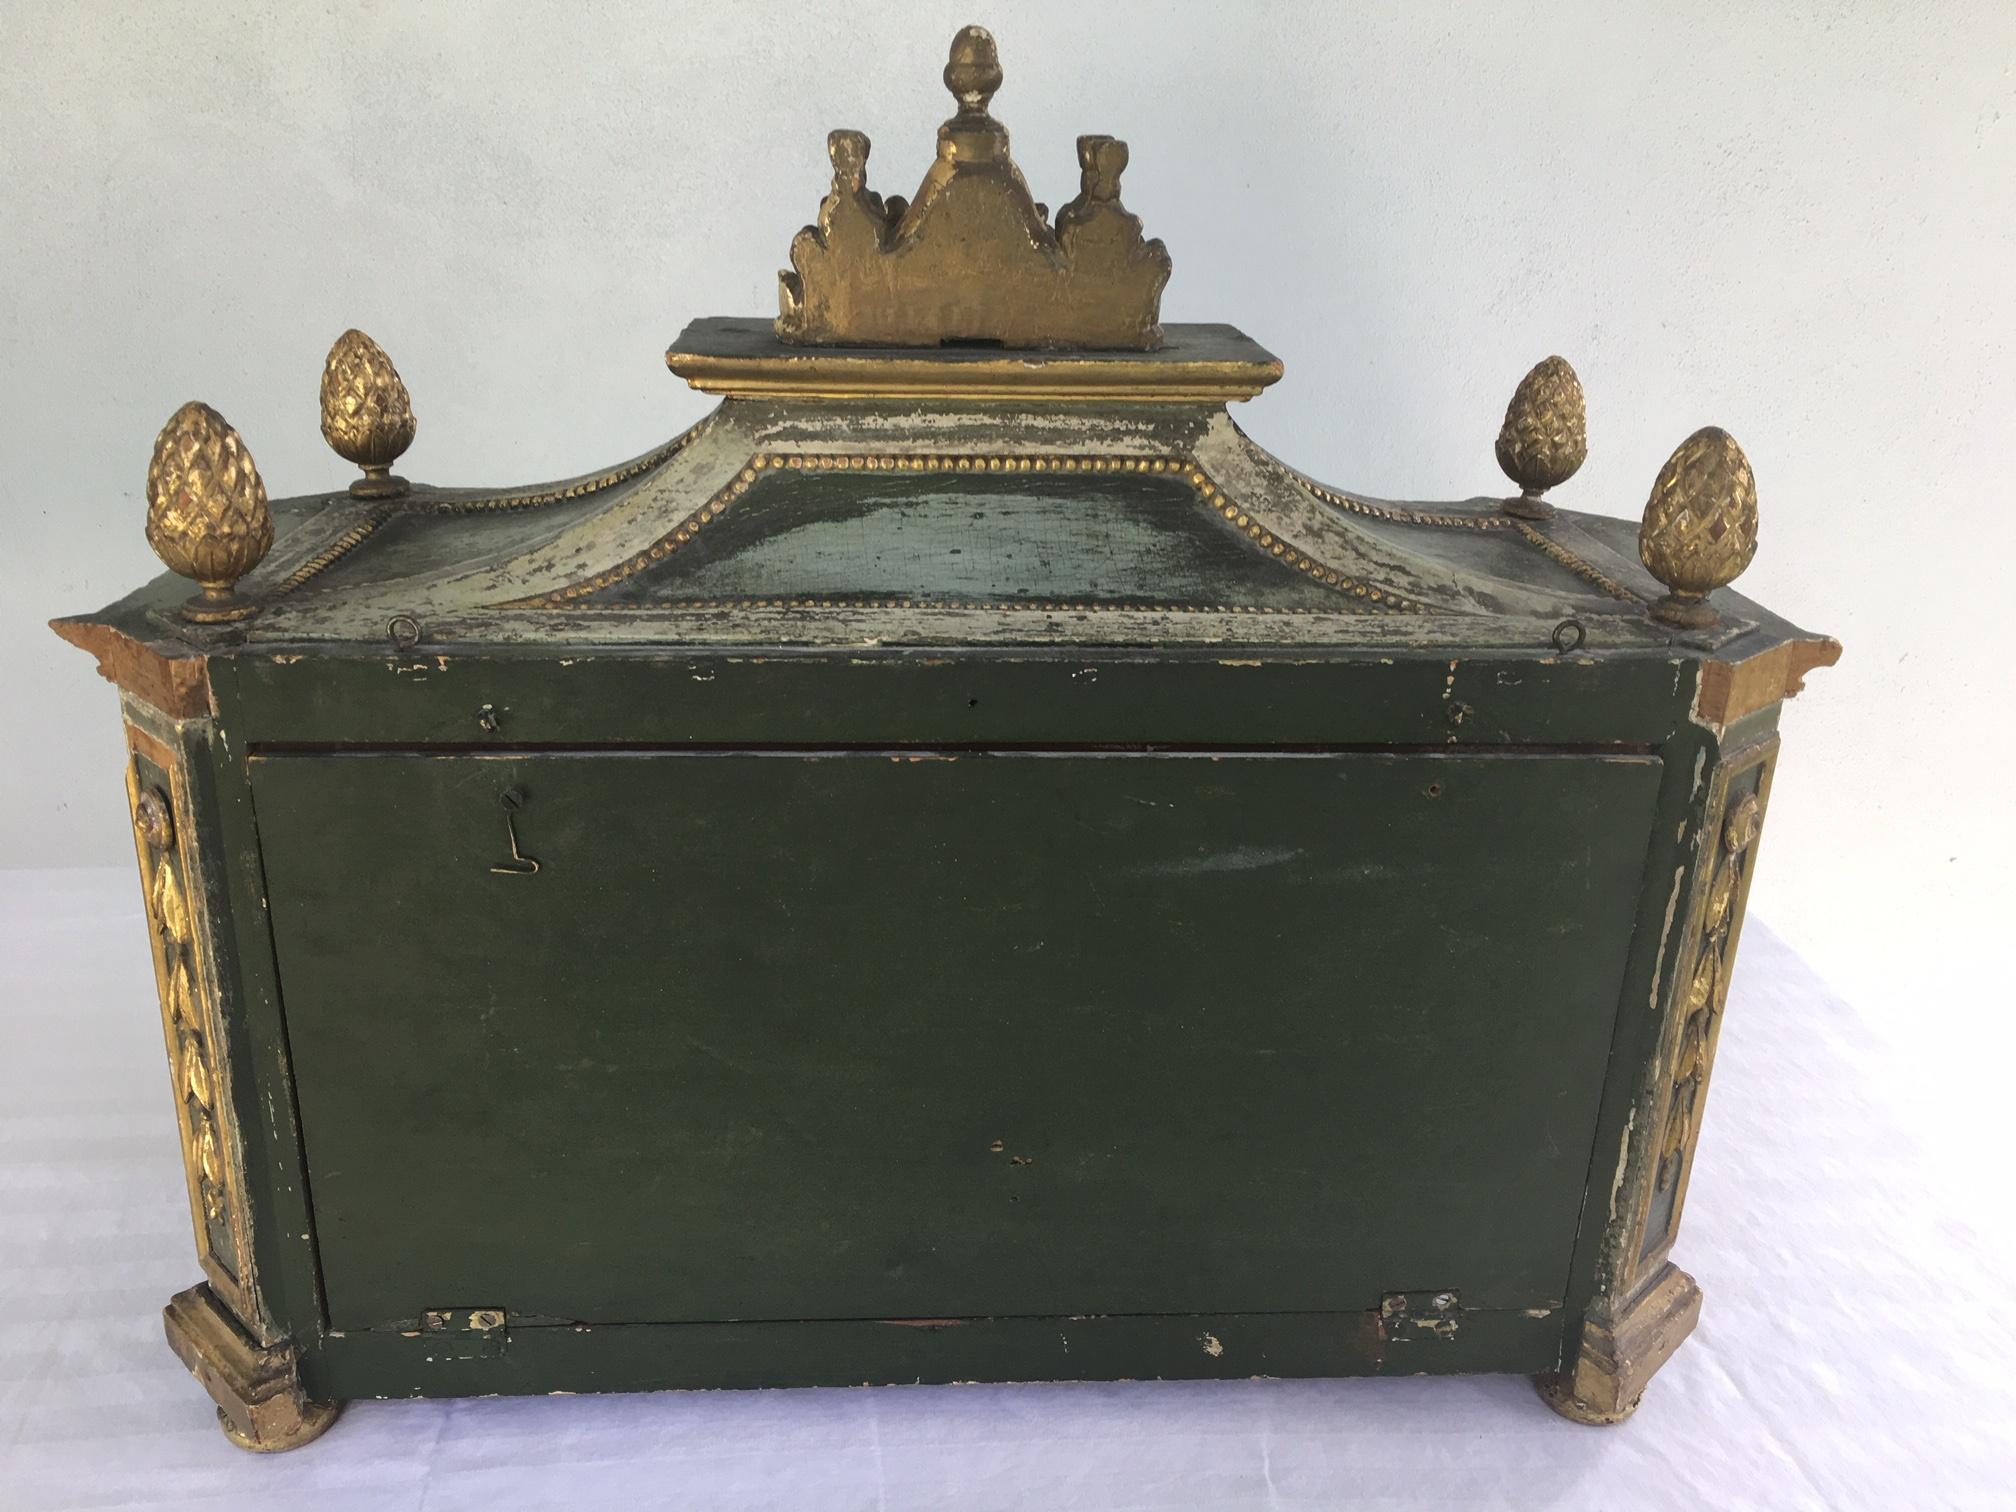 Important Early 18th Century Italian Baroque Reliquary Casket 2